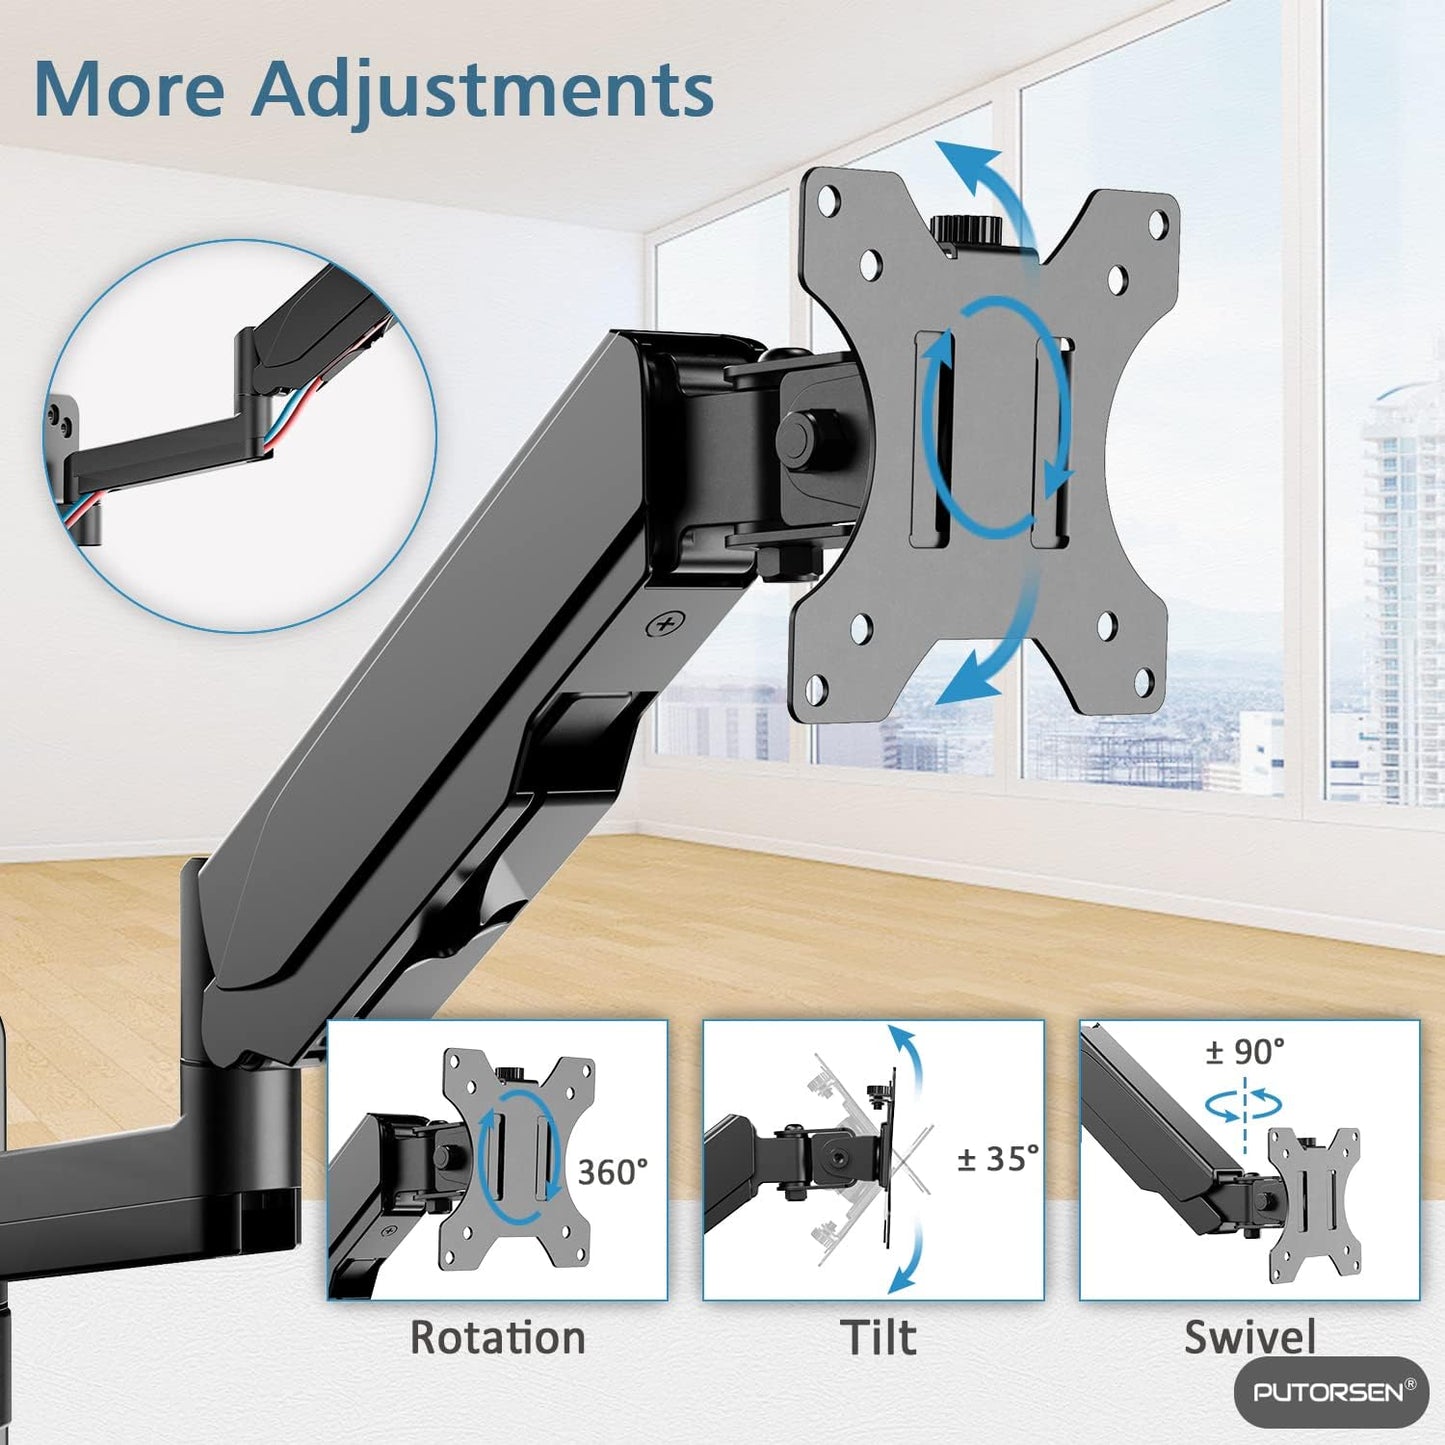 Monitor Arm Wall Mount Bracket for 17-32 inch Monitor & Small TV, Height Adjustable Gas Spring Single Wall Monitor Arm, Tilt Swivel Rotate, Load Weight 2.2 to 19.8lbs, Next day delivery